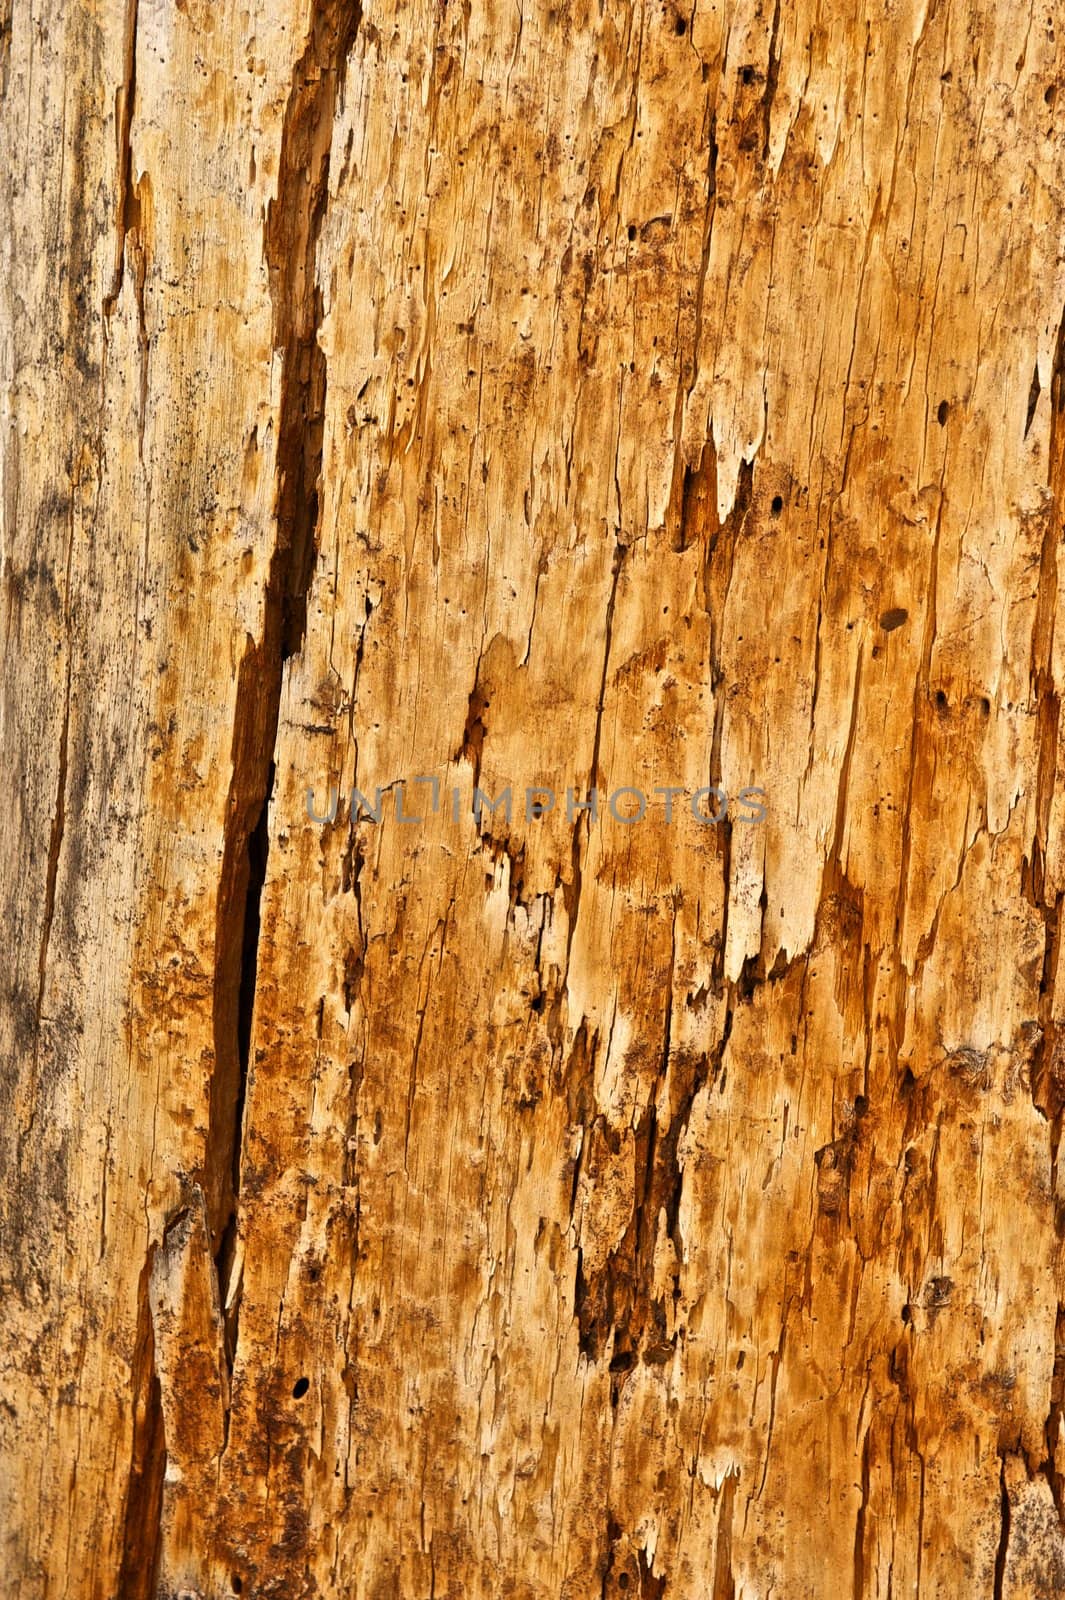 Tree Trunk Surface Without Bark by pixelsnap